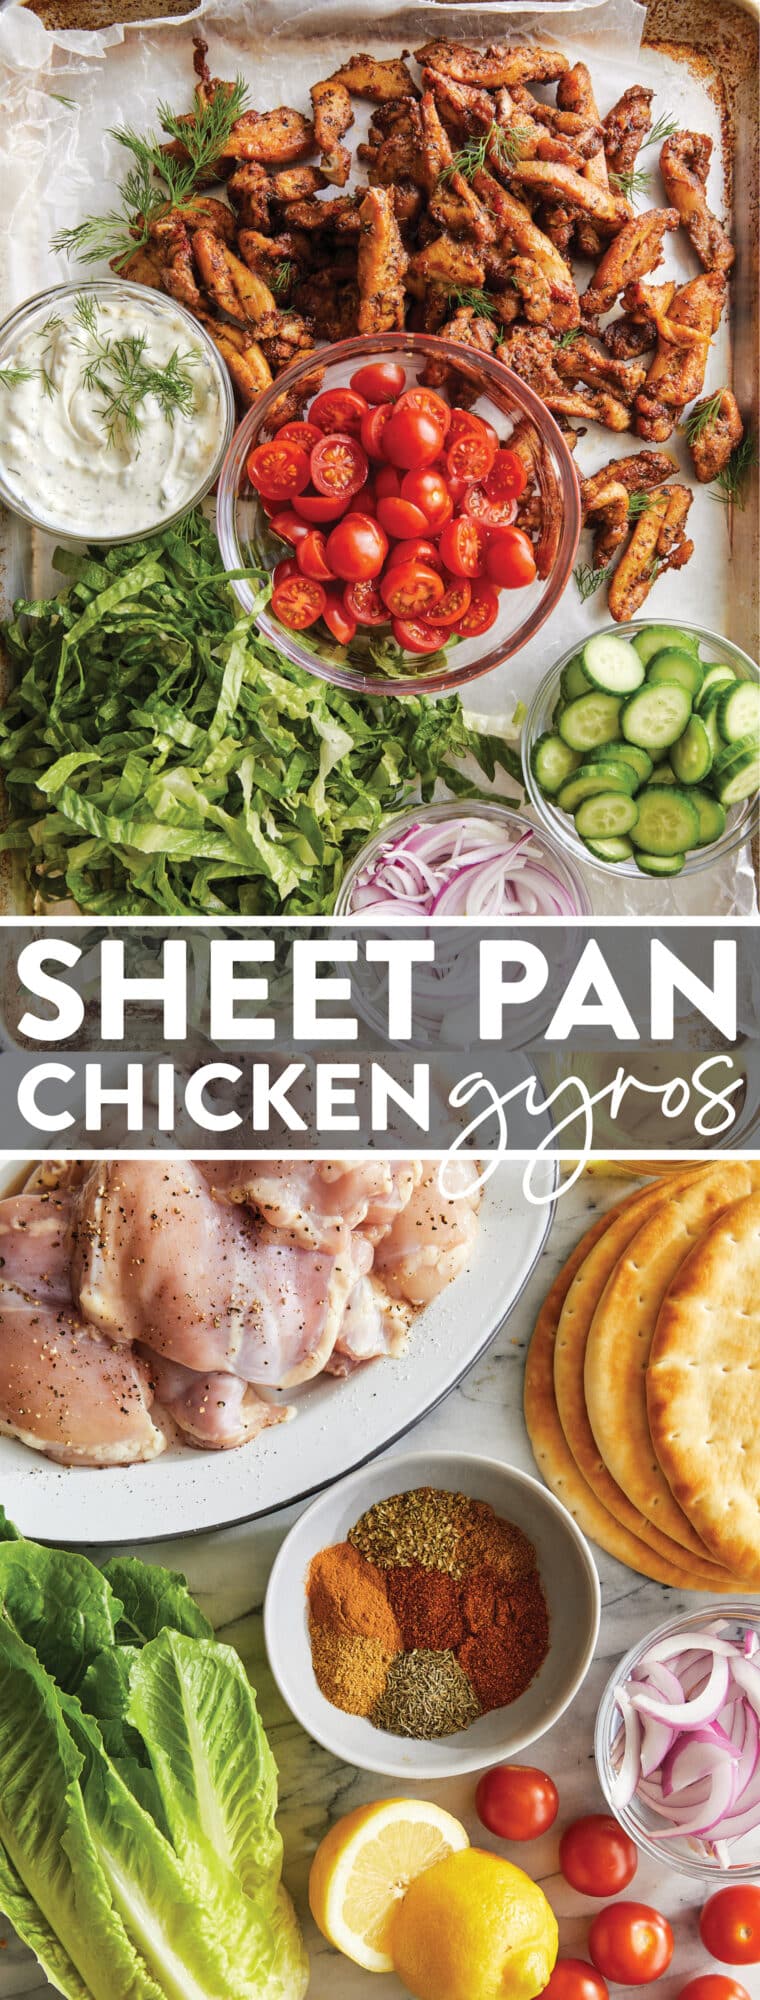 Sheet Pan Chicken Gyros - Perfectly seasoned chicken baked to perfection on ONE SINGLE PAN! Serve in warm pitas for a quick weeknight meal!